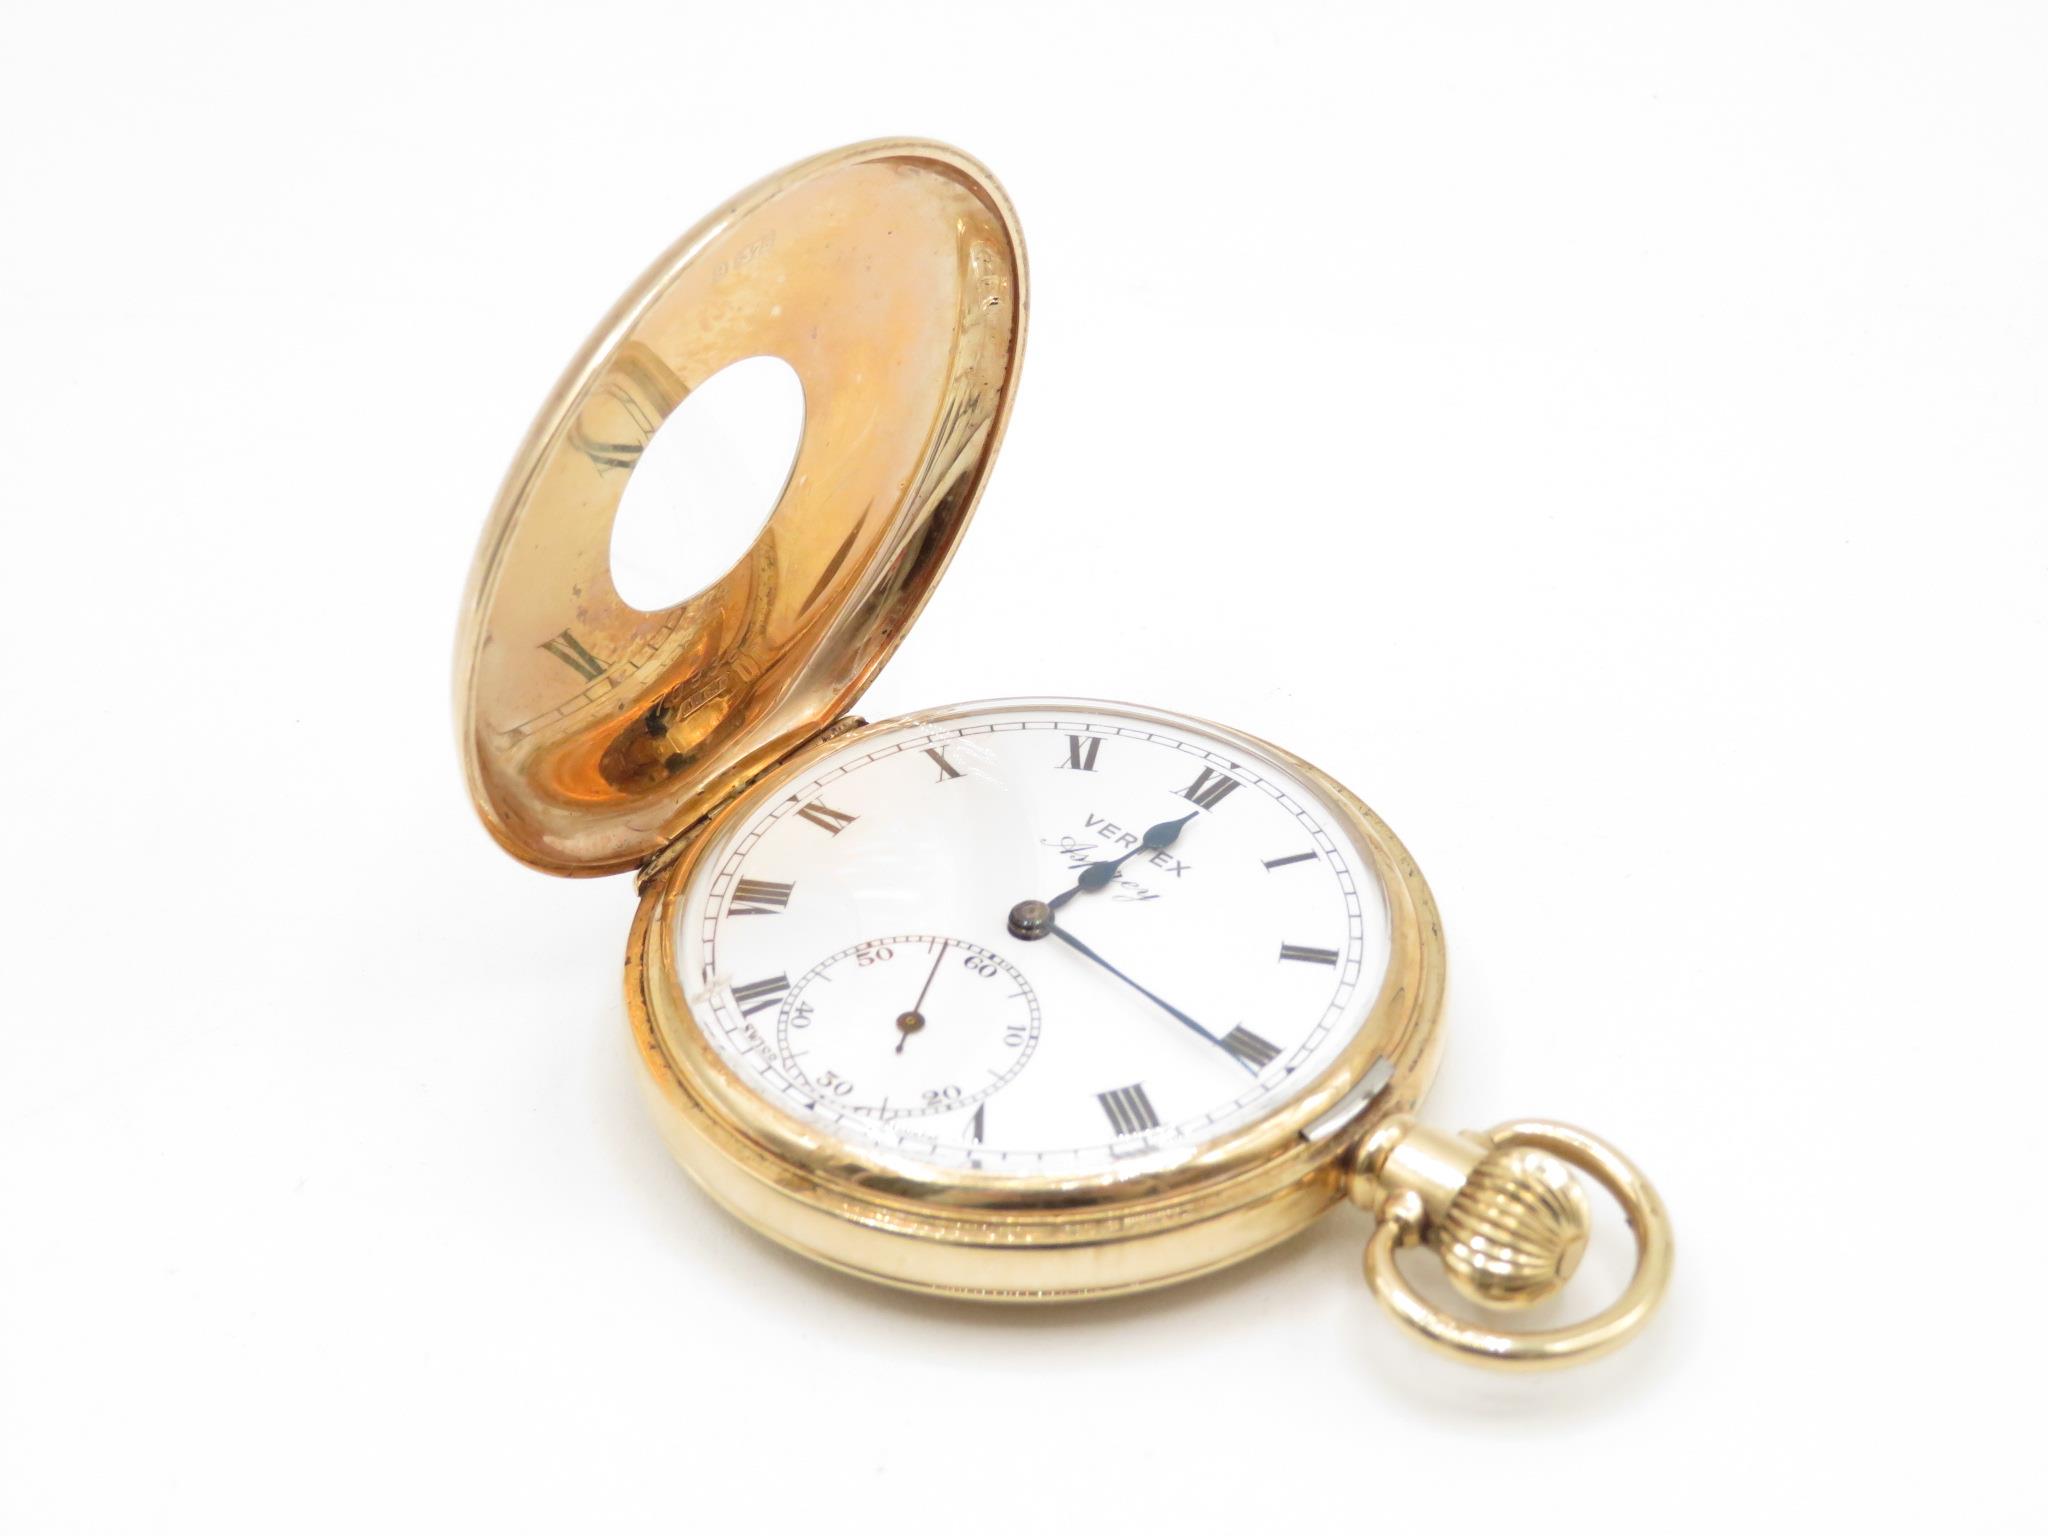 9ct gold gent's pocket watch by Vertex for Asprey signed 50 years loyal service J Summers and Sons - Image 8 of 9